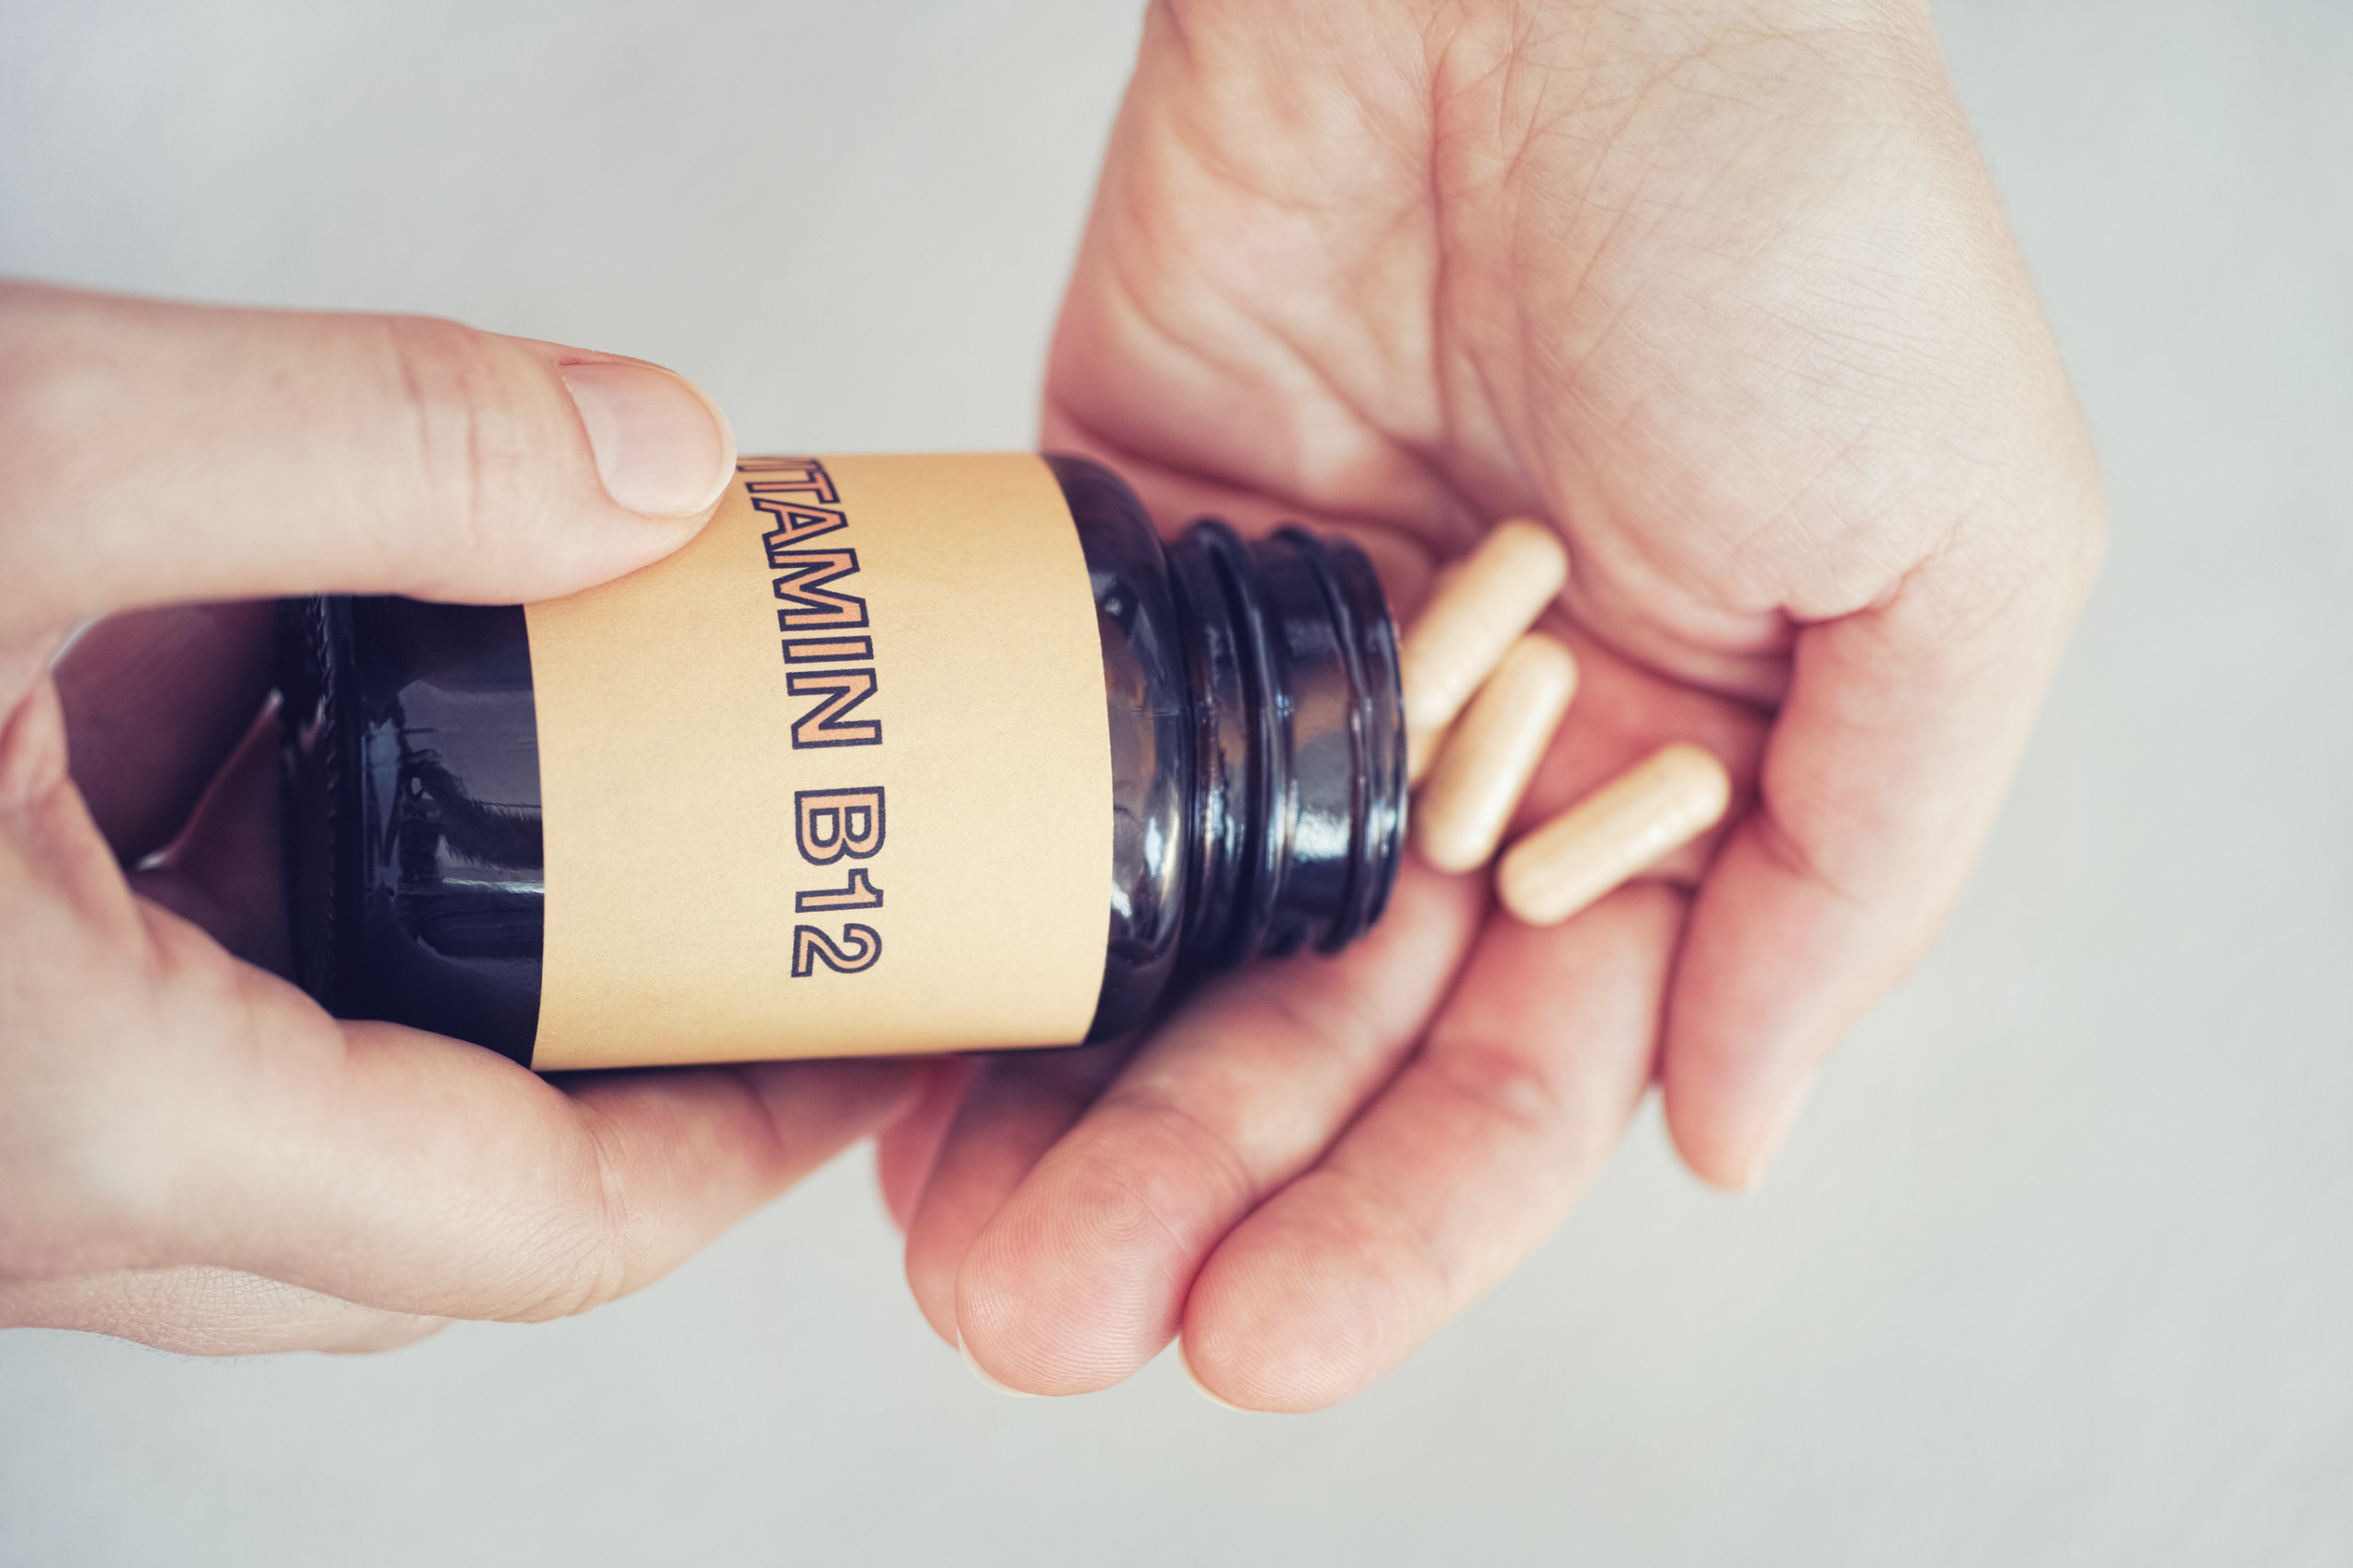 Vitamin B12 pills being dispensed from a bottle